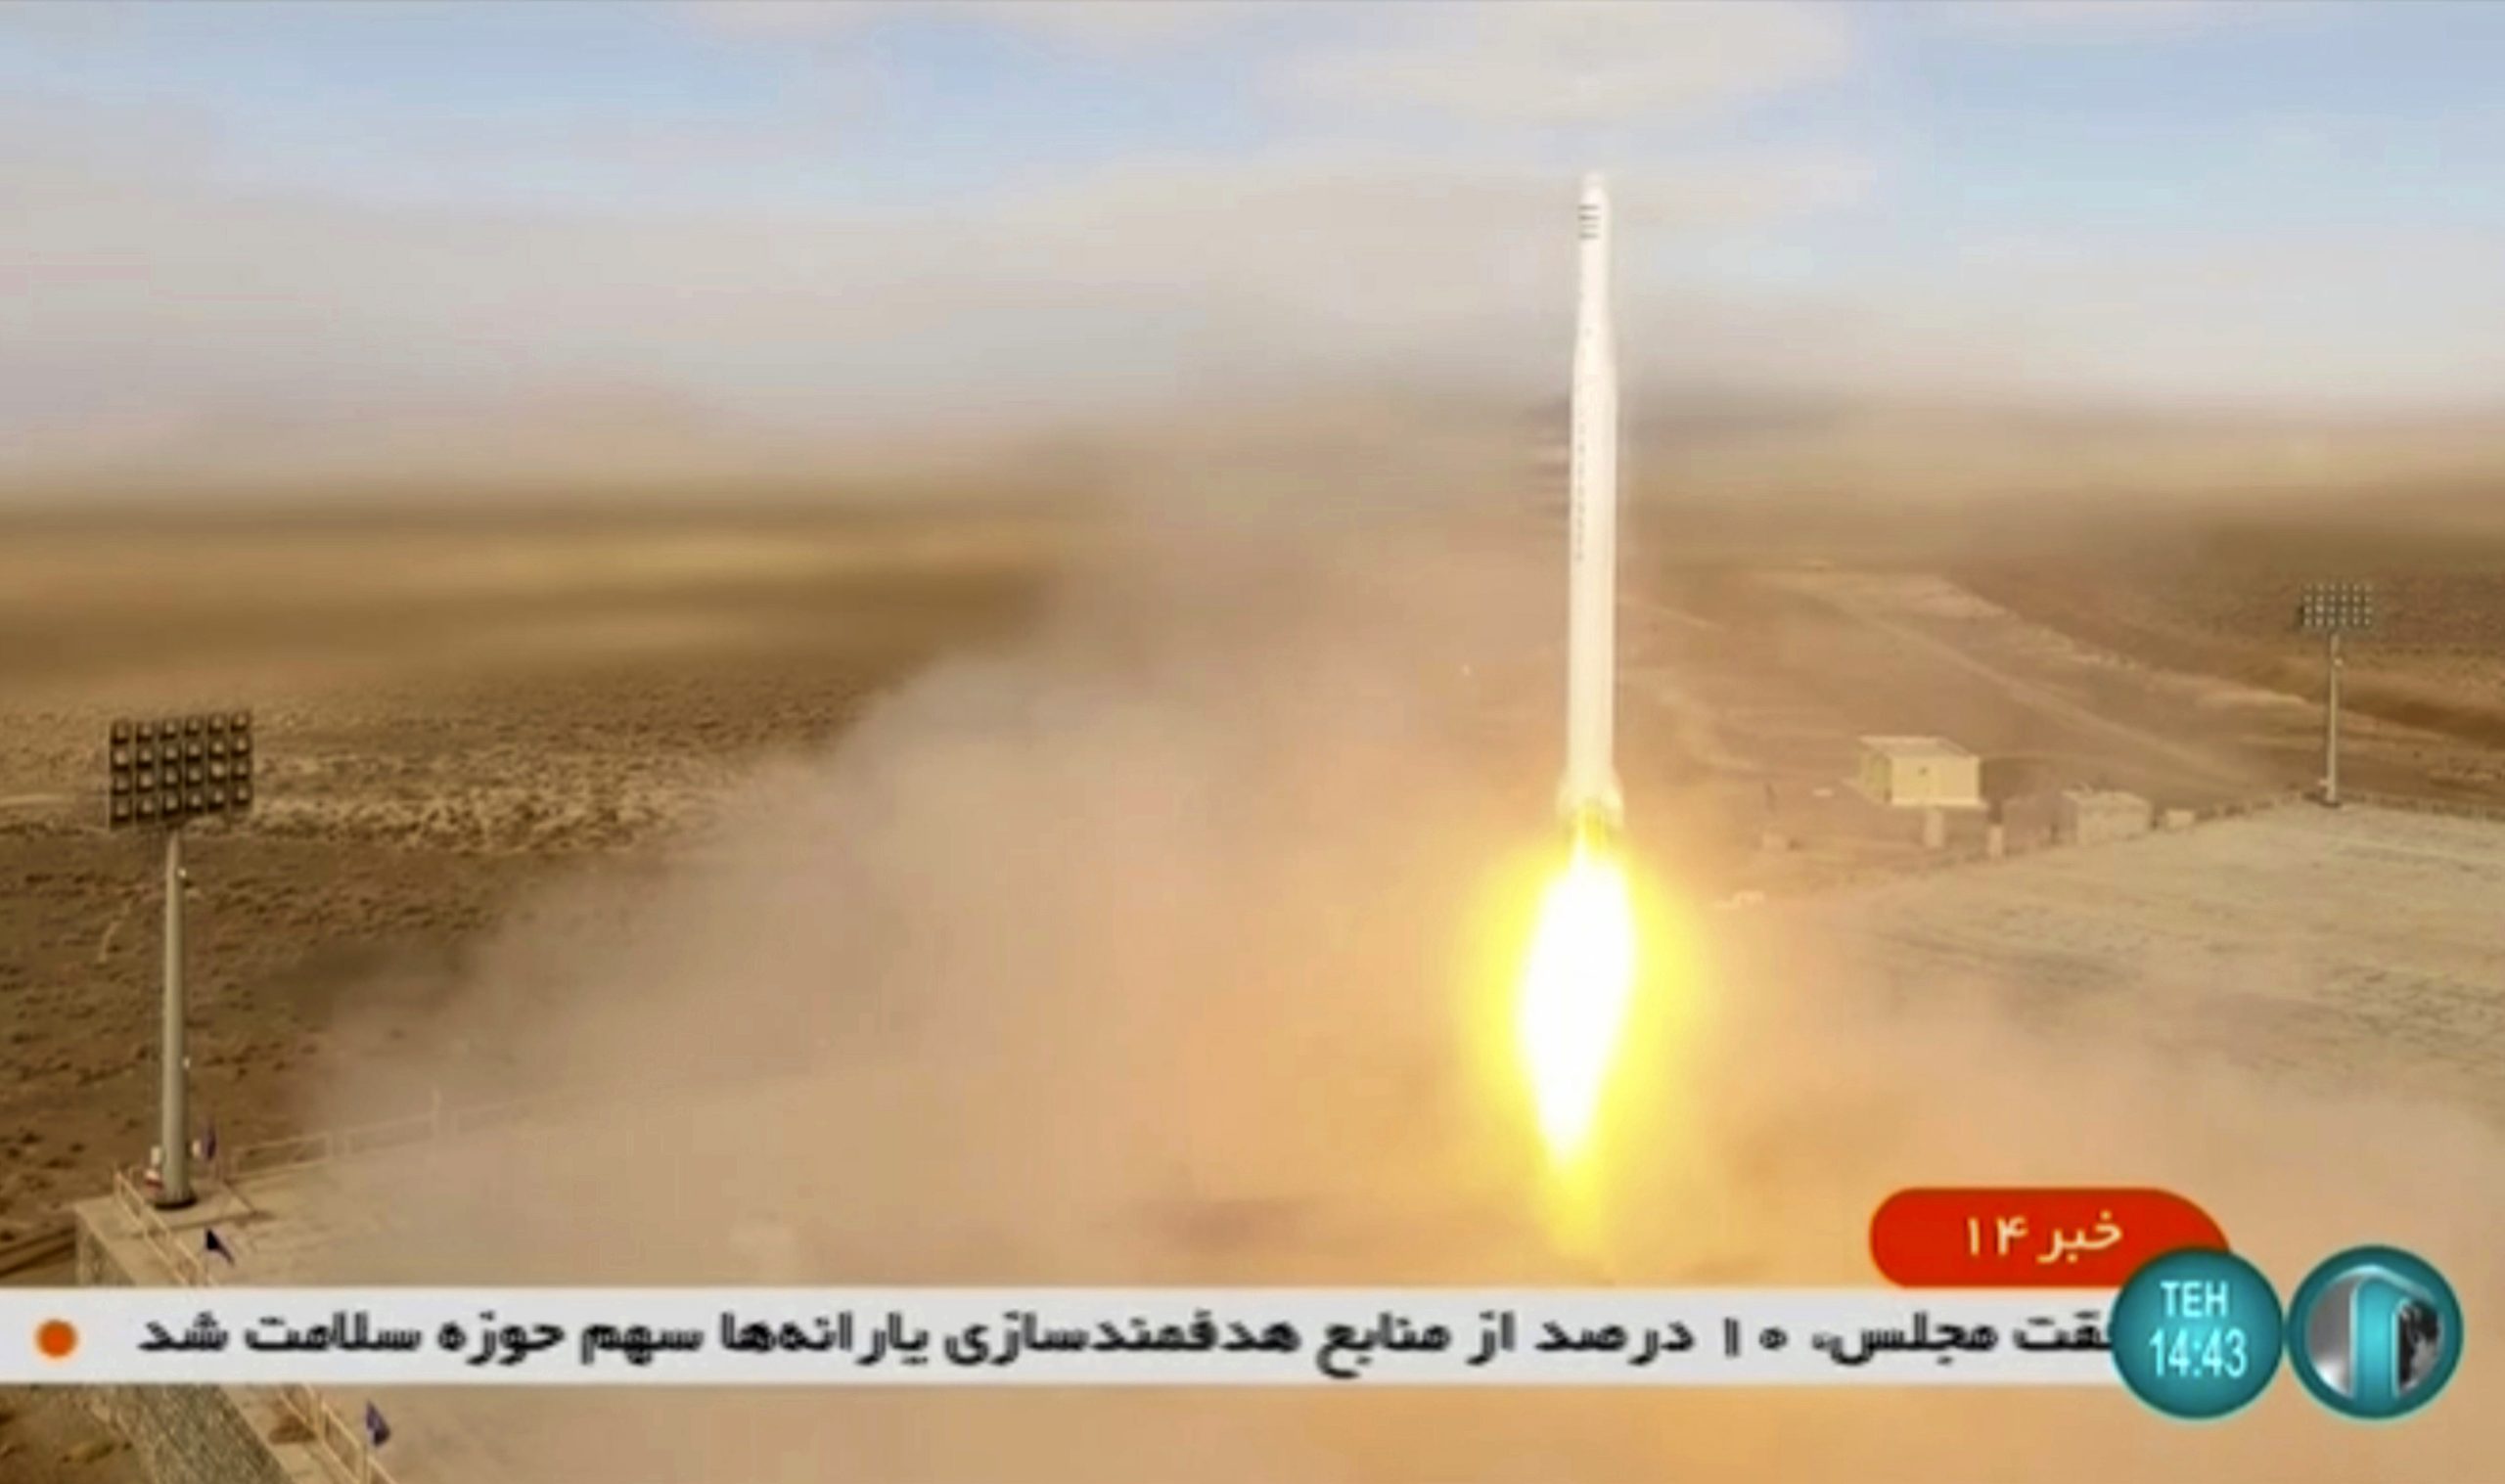 In March, Iran launched the Qased rocket from Shahrud. The US military says this missile, used to put a spy satellite into orbit, could also allow Tehran to launch nuclear warheads, increasing Israel’s vulnerability to attack by Iran and its need to take urgent defensive measures.